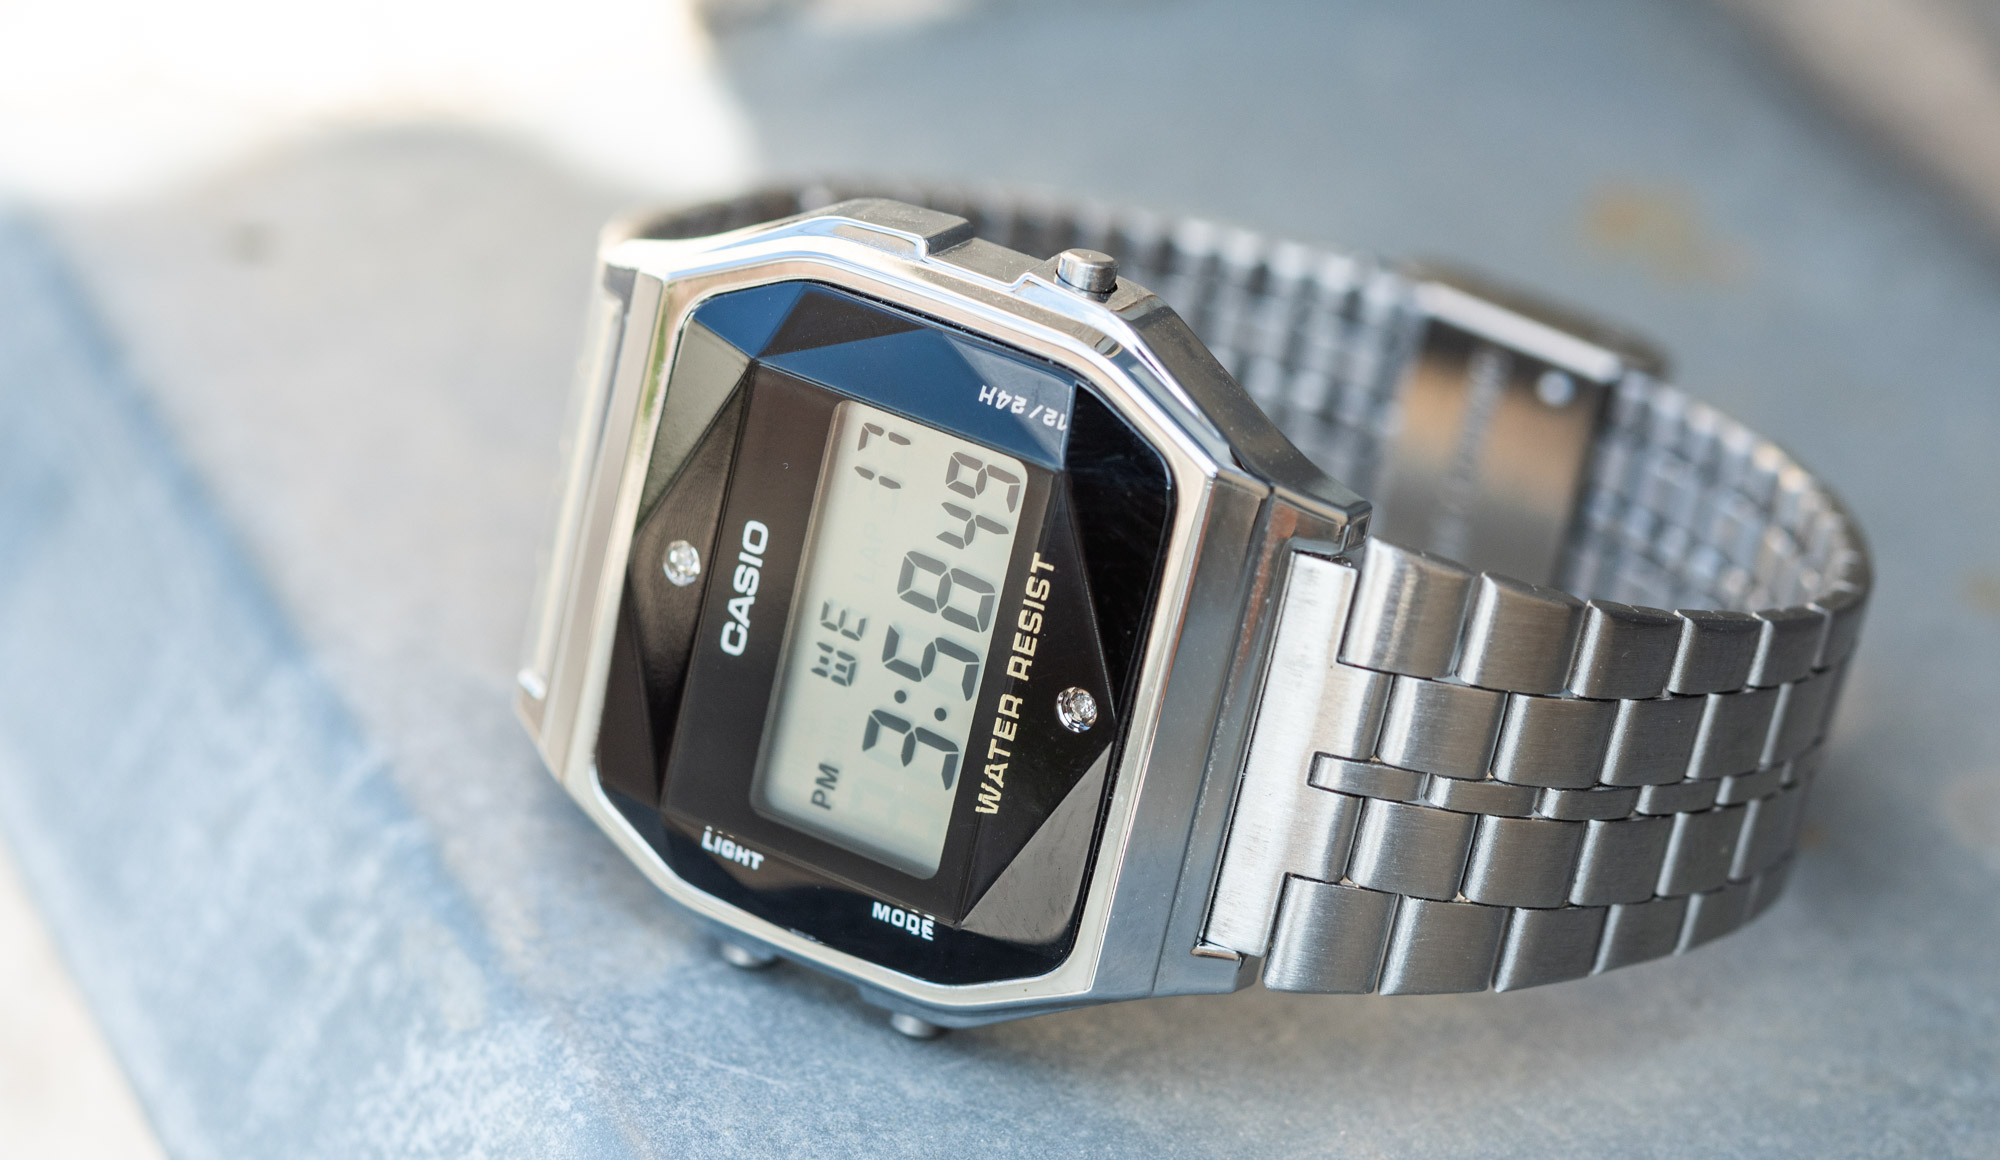 Casio A159WAD-1D Watch Review: Should You Buy The Cheapest-Ever